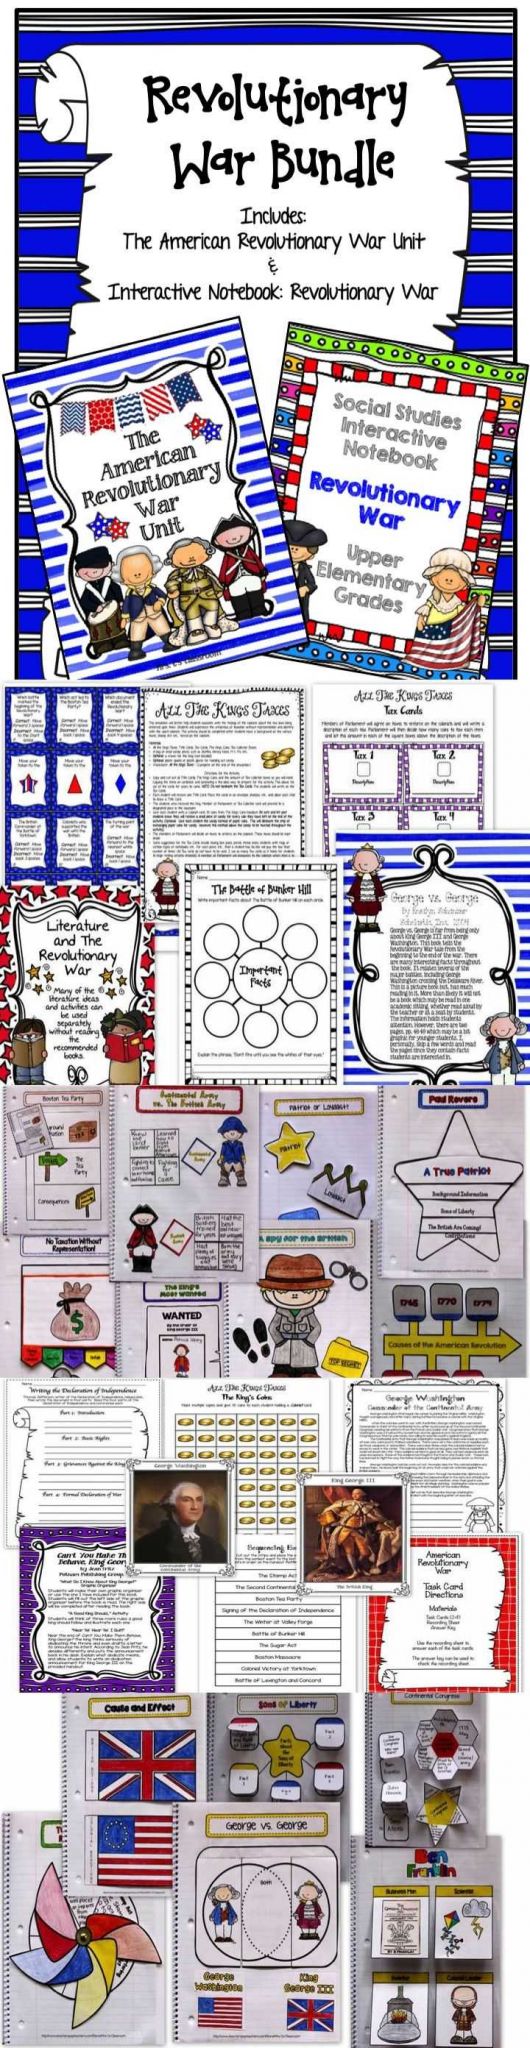 The Alamo Worksheet Answers and 29 Best social Stu S Interactive Notebooks Images On Pinterest